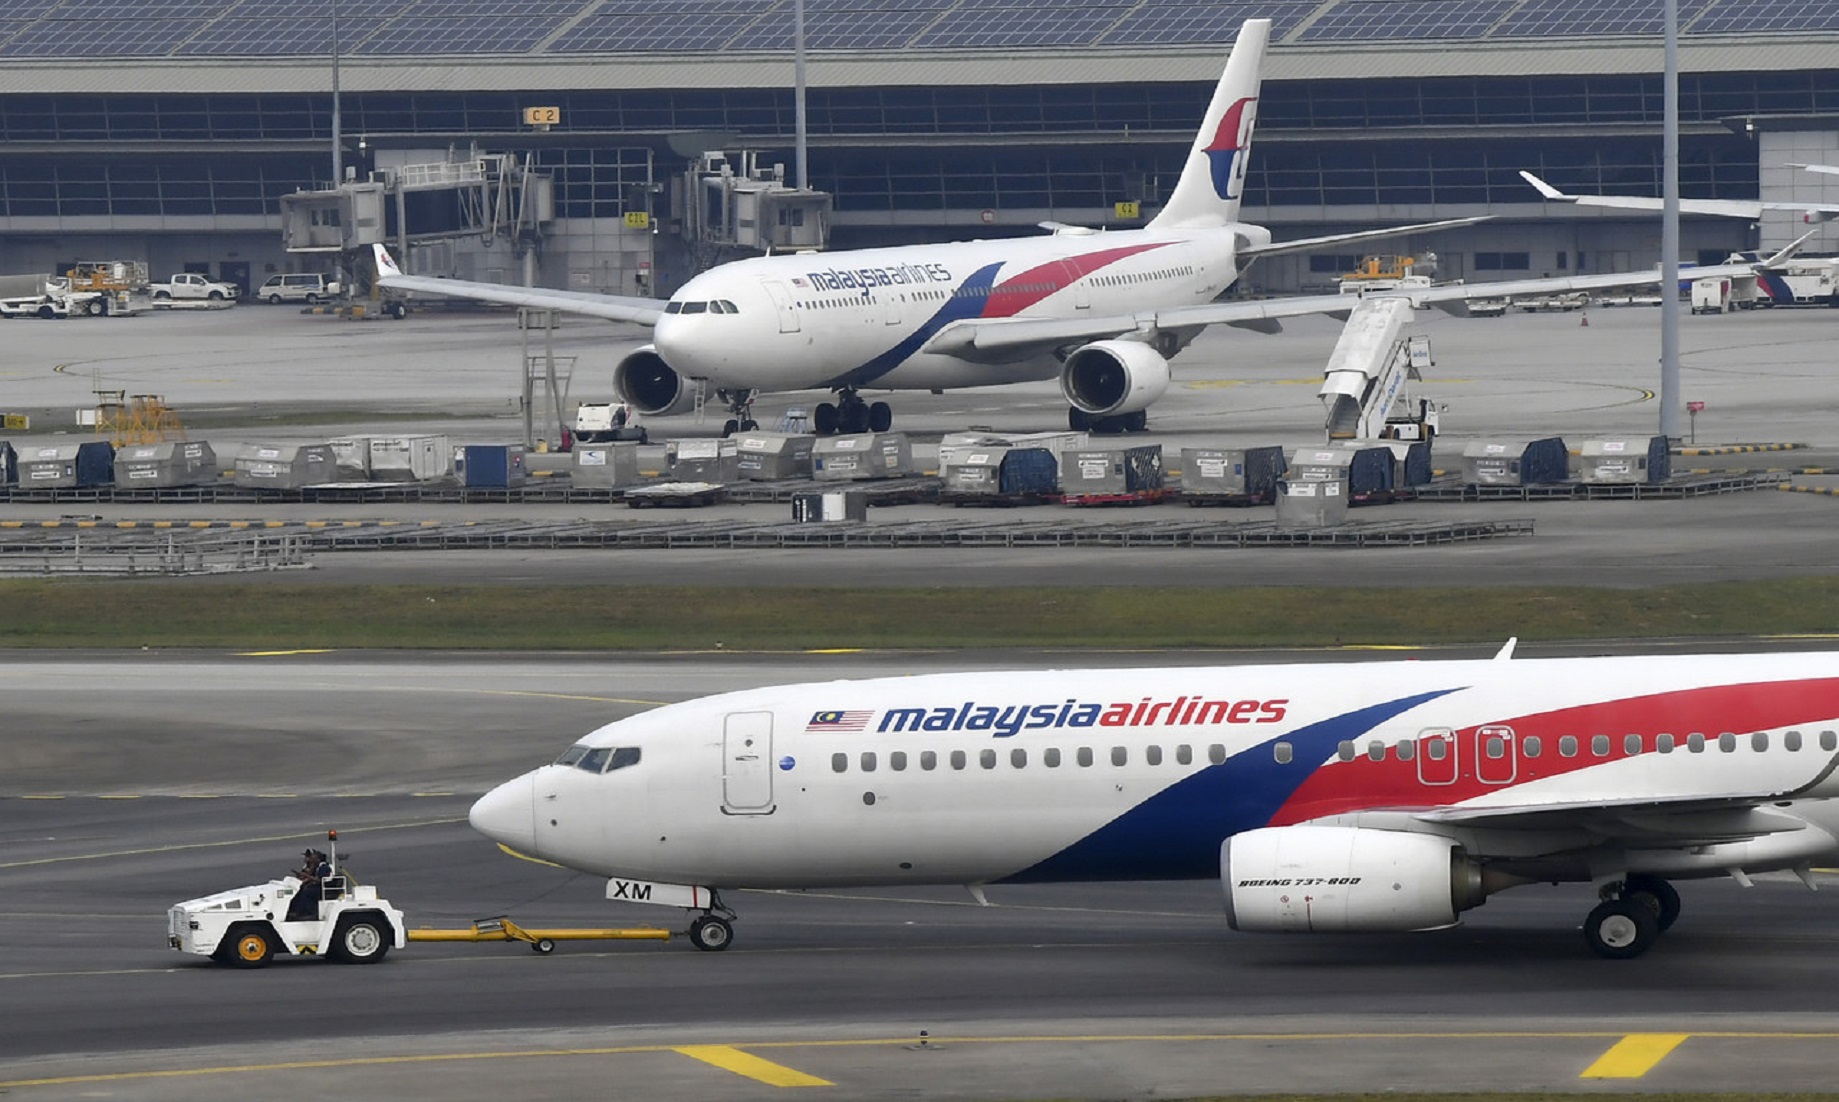 Malaysia Airlines Flights From India Did Not Carry Any Passenger